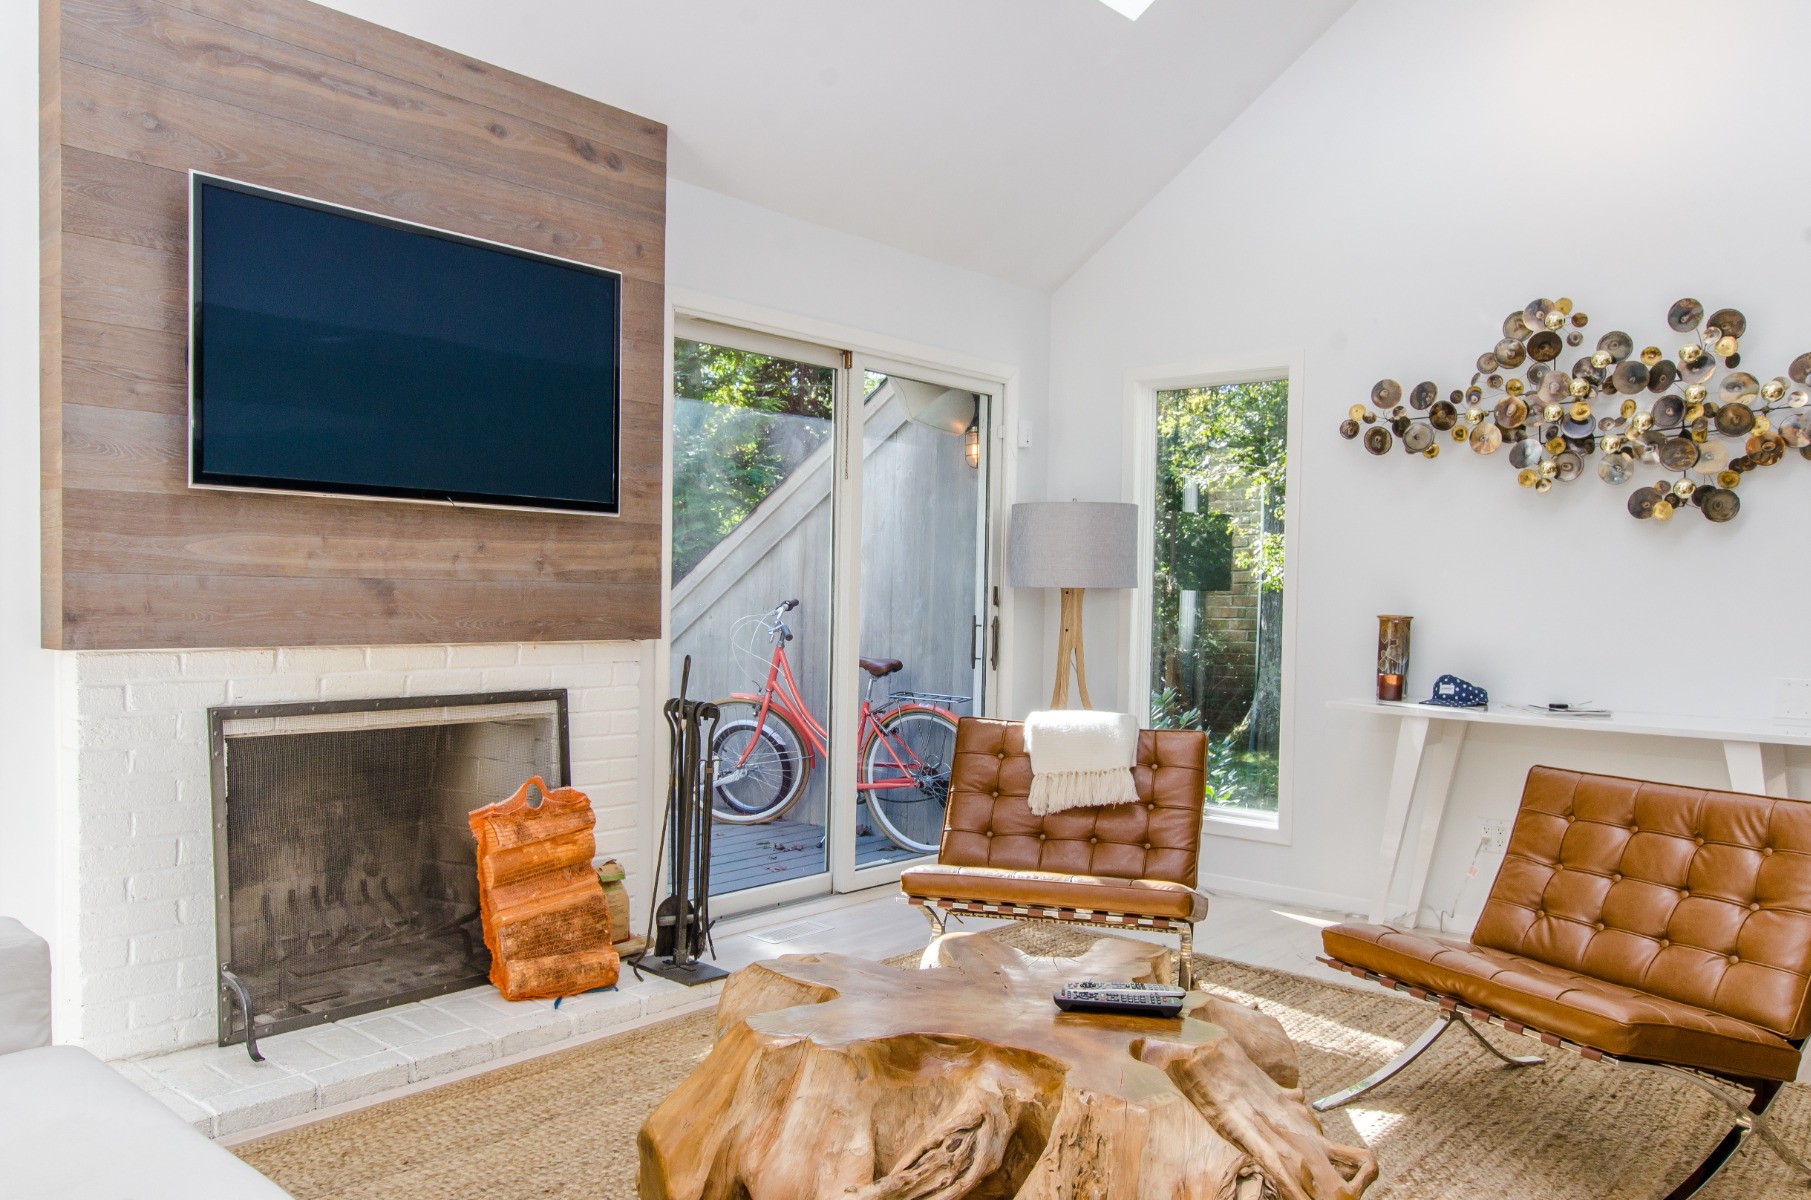 Media wall with fireplace and leather chairs in a living room